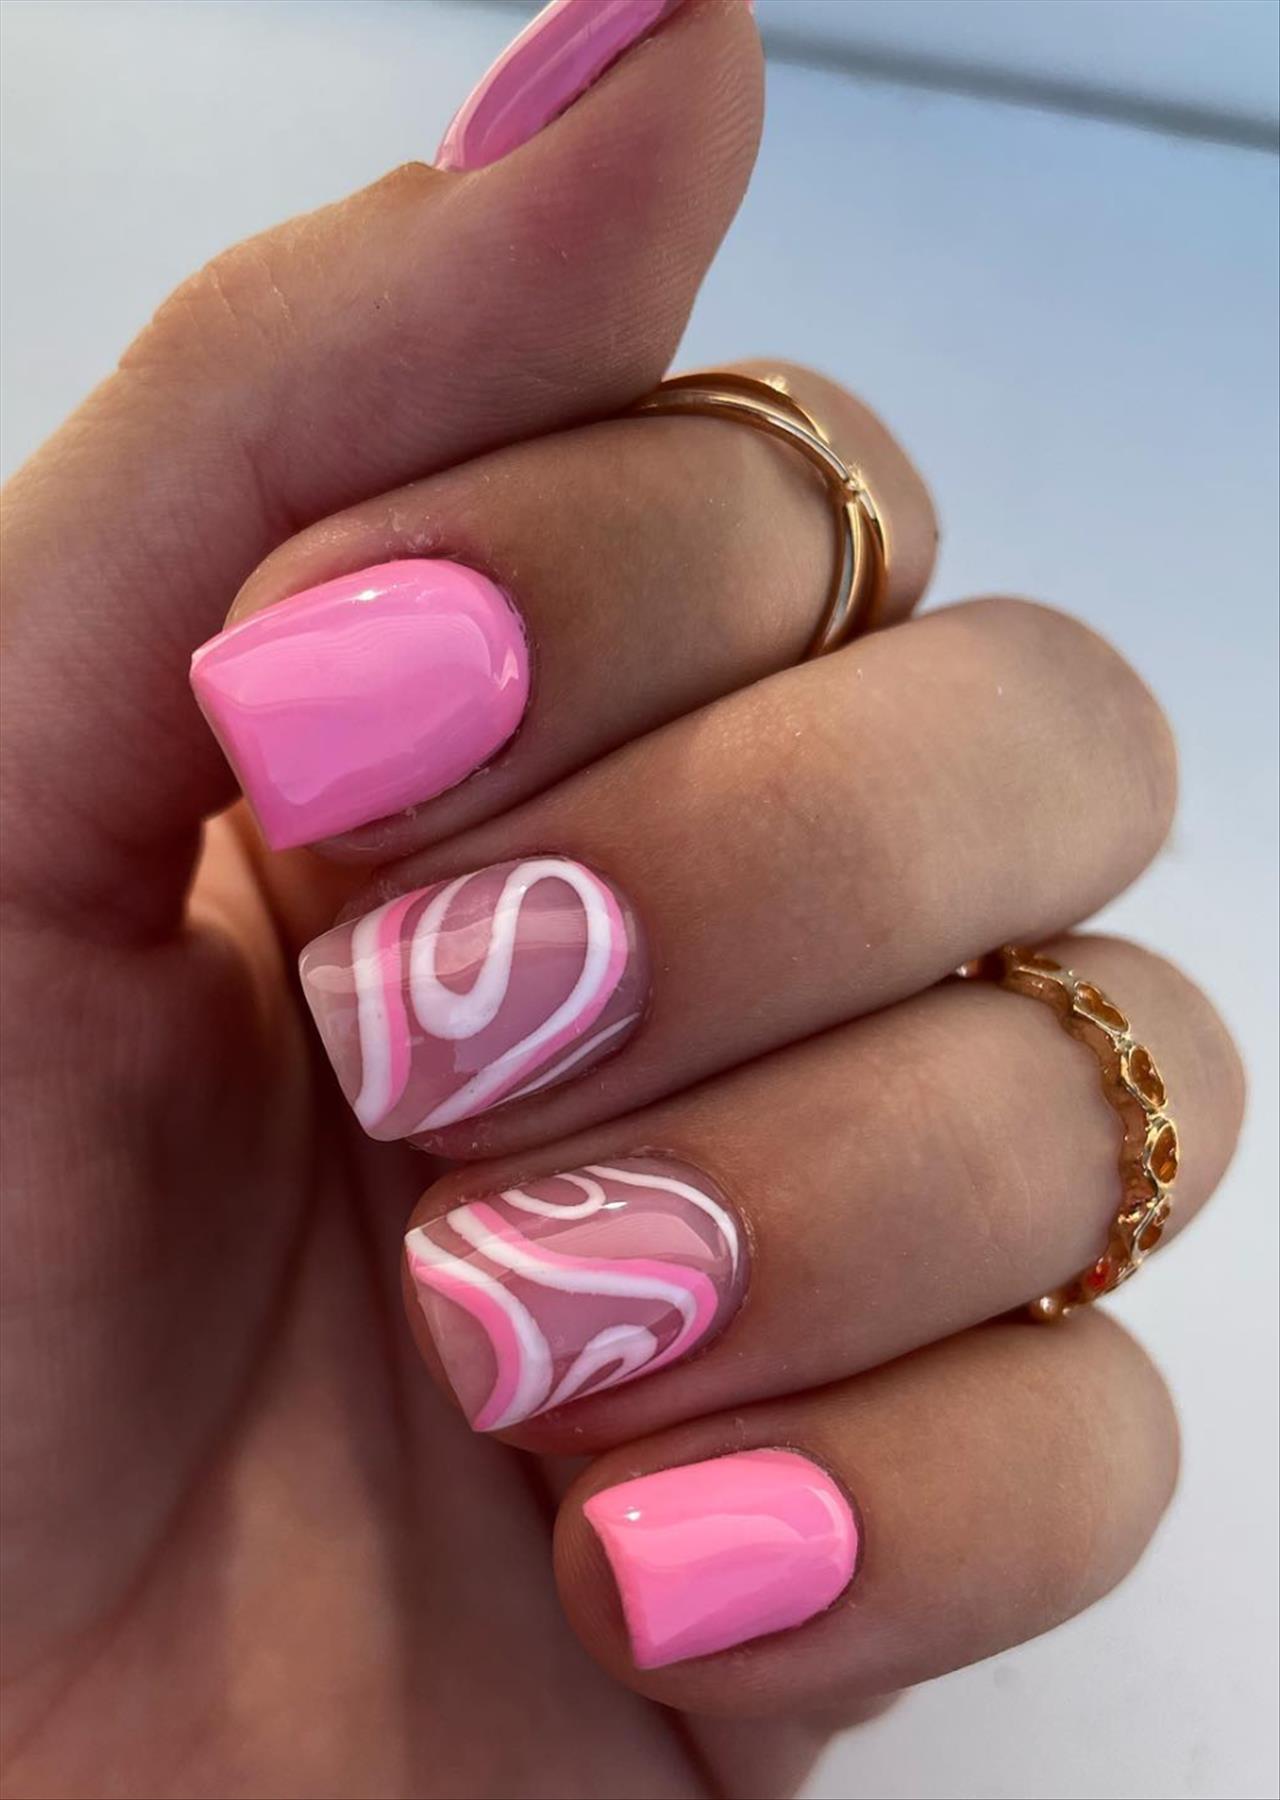 Pretty short pink nails perfect for the next mani!